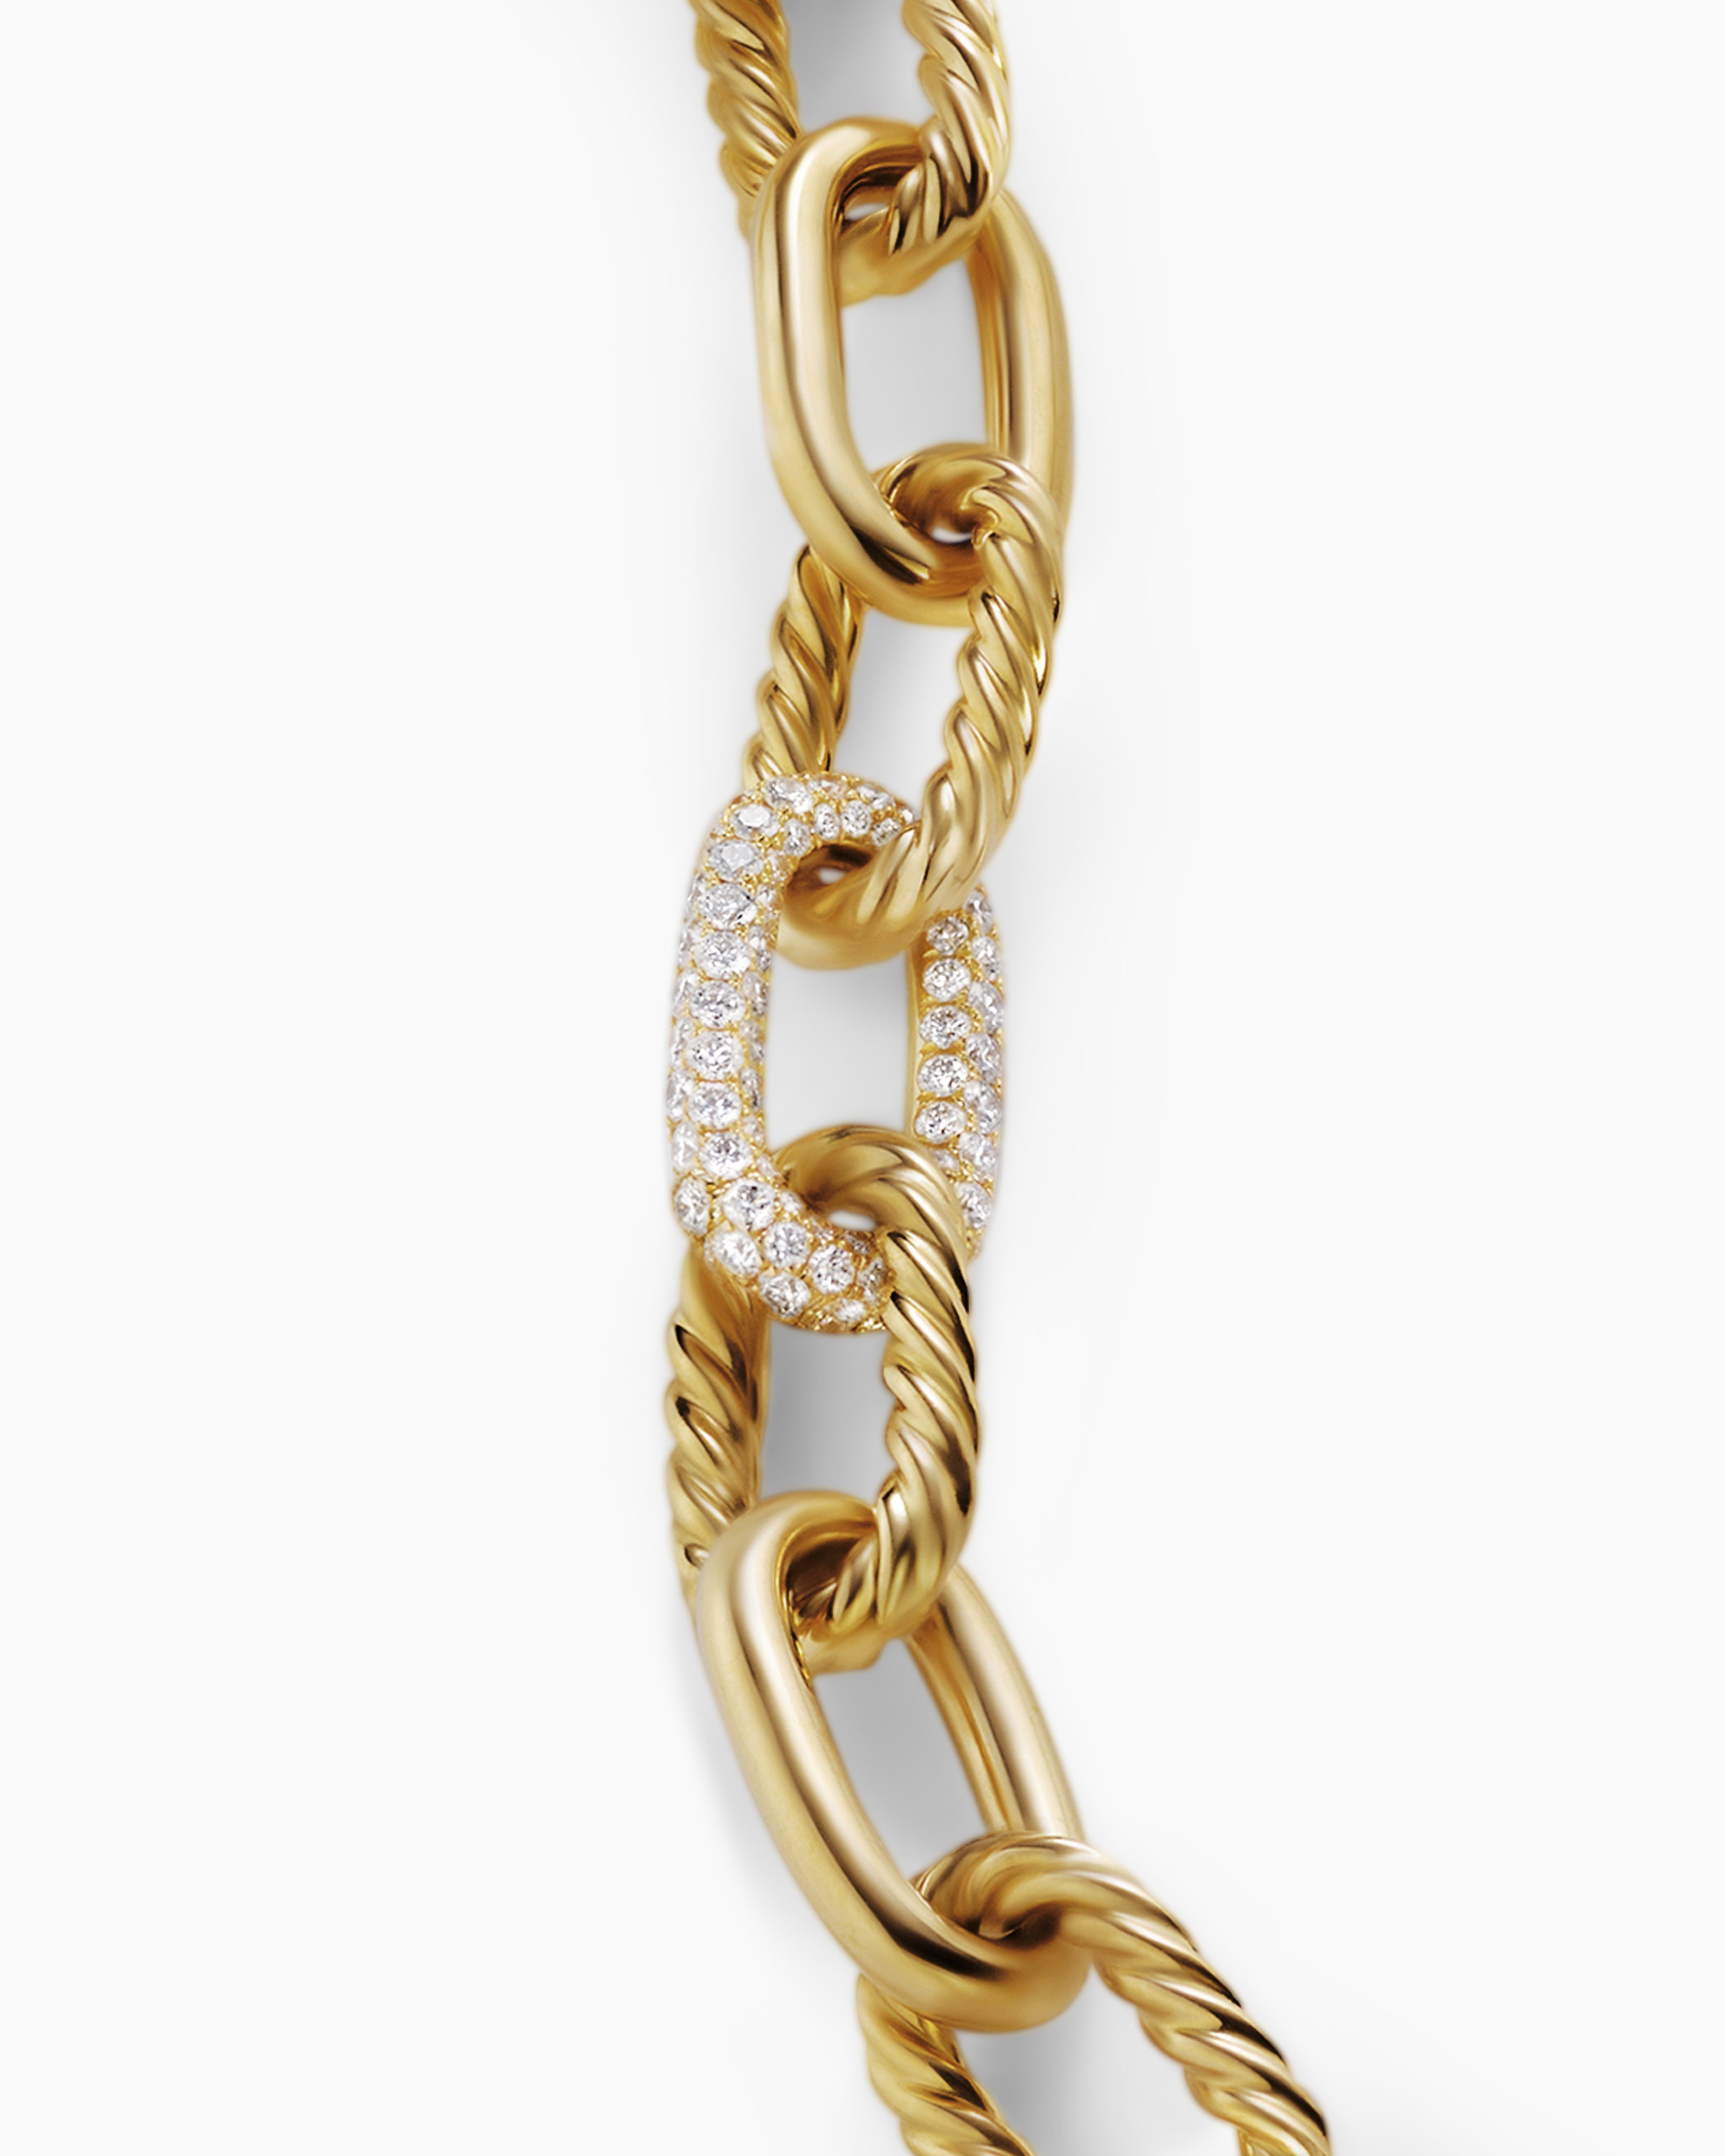 DY Madison Chain Bracelet in Sterling Silver with 18K Yellow Gold, 11mm